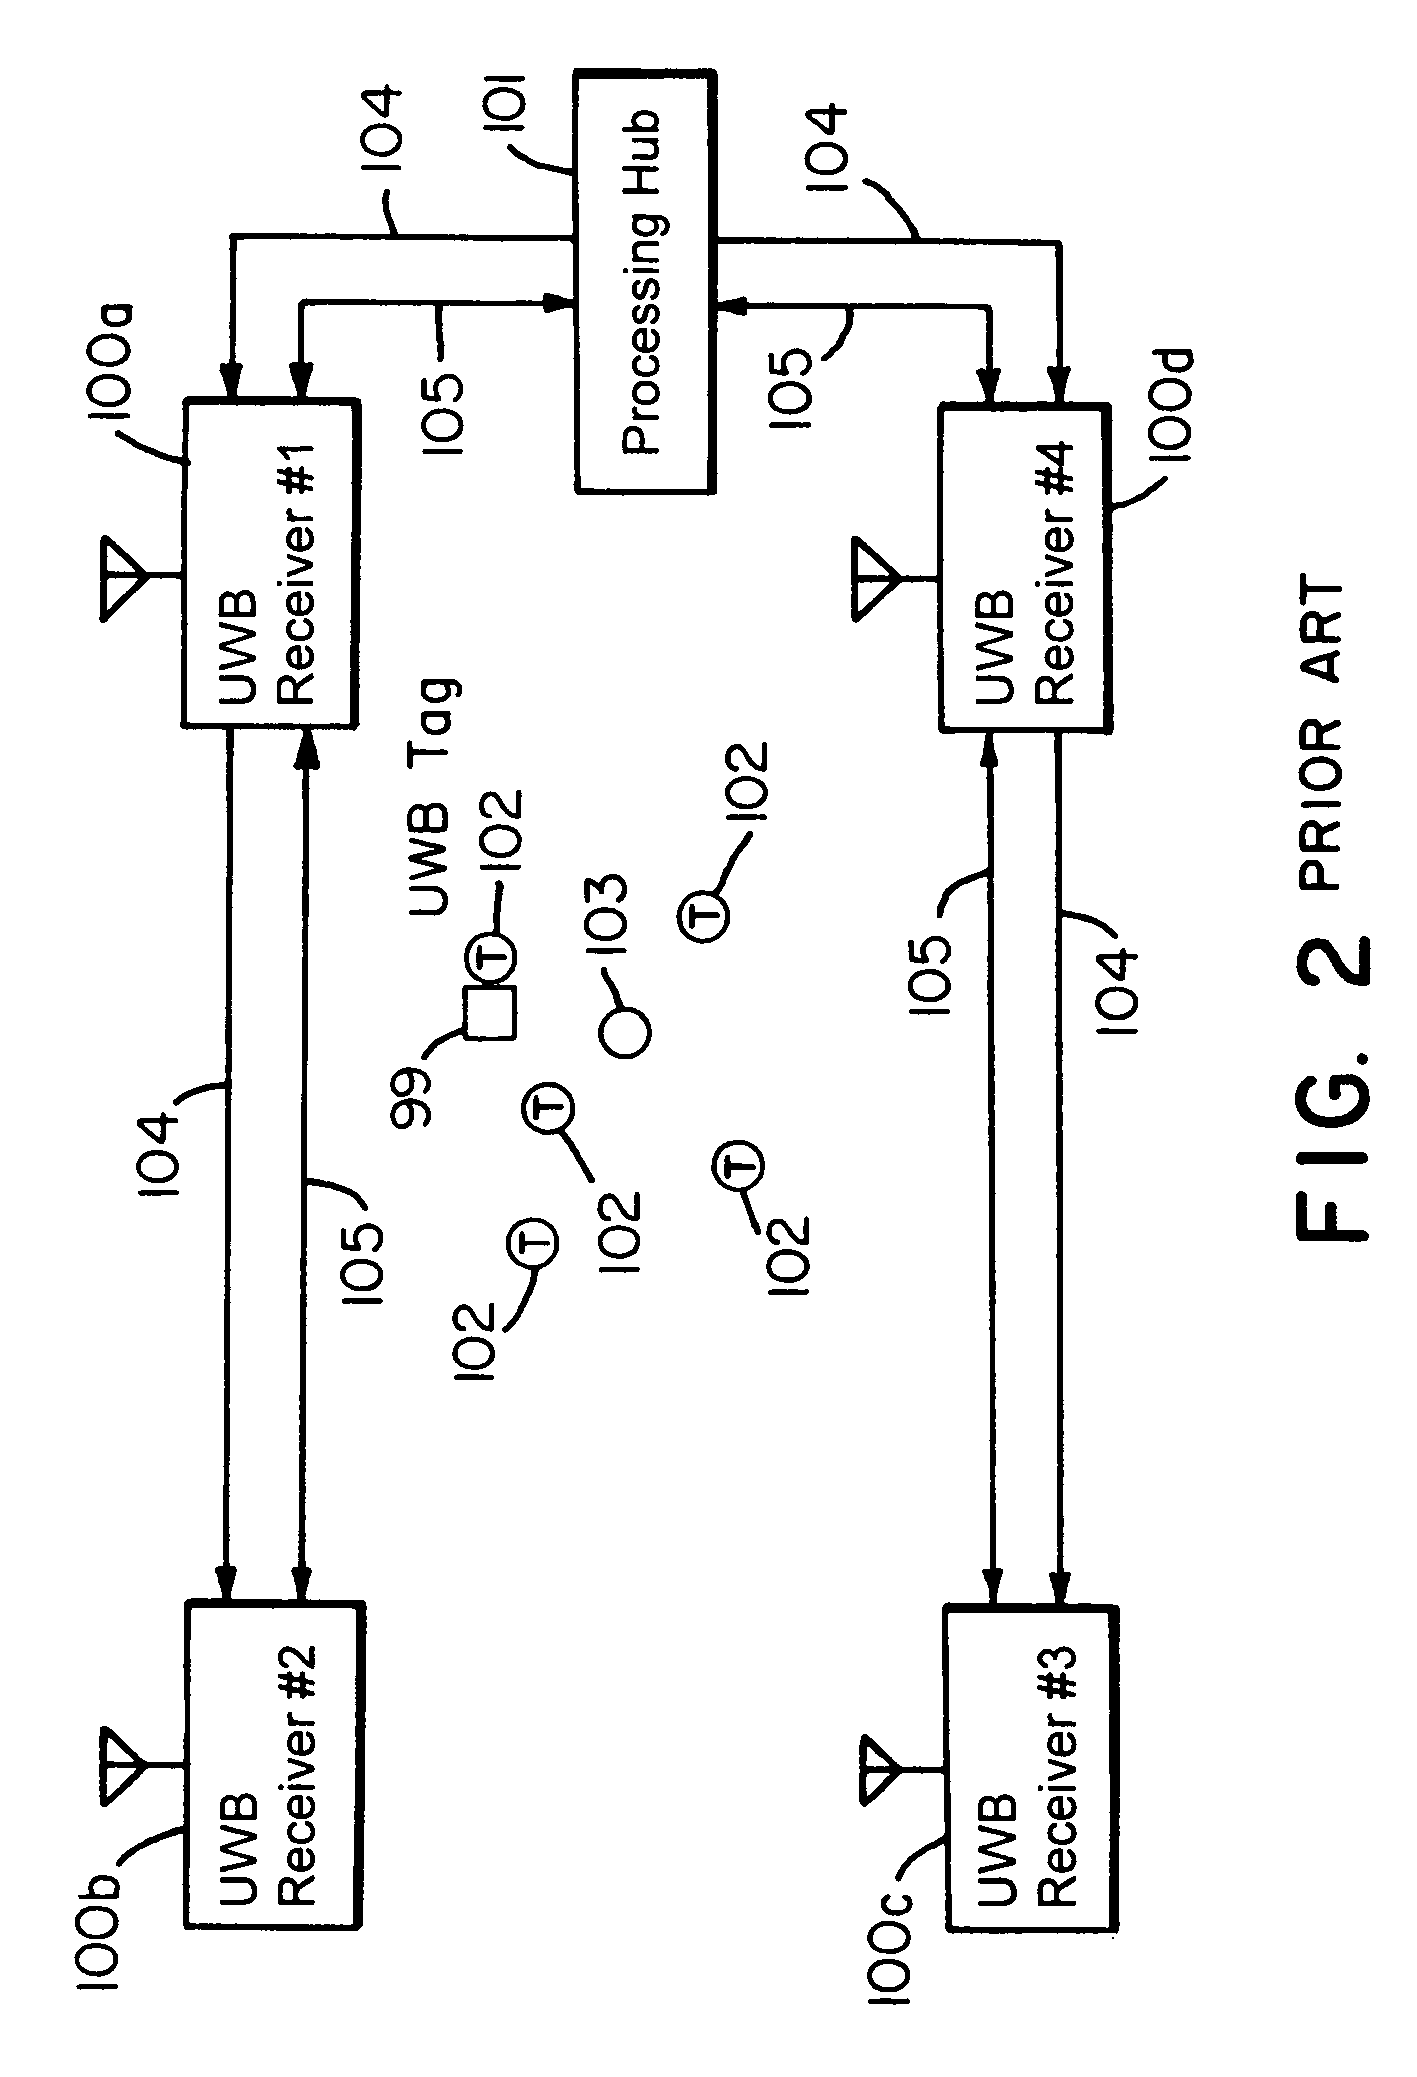 Extensible object location system and method using multiple references